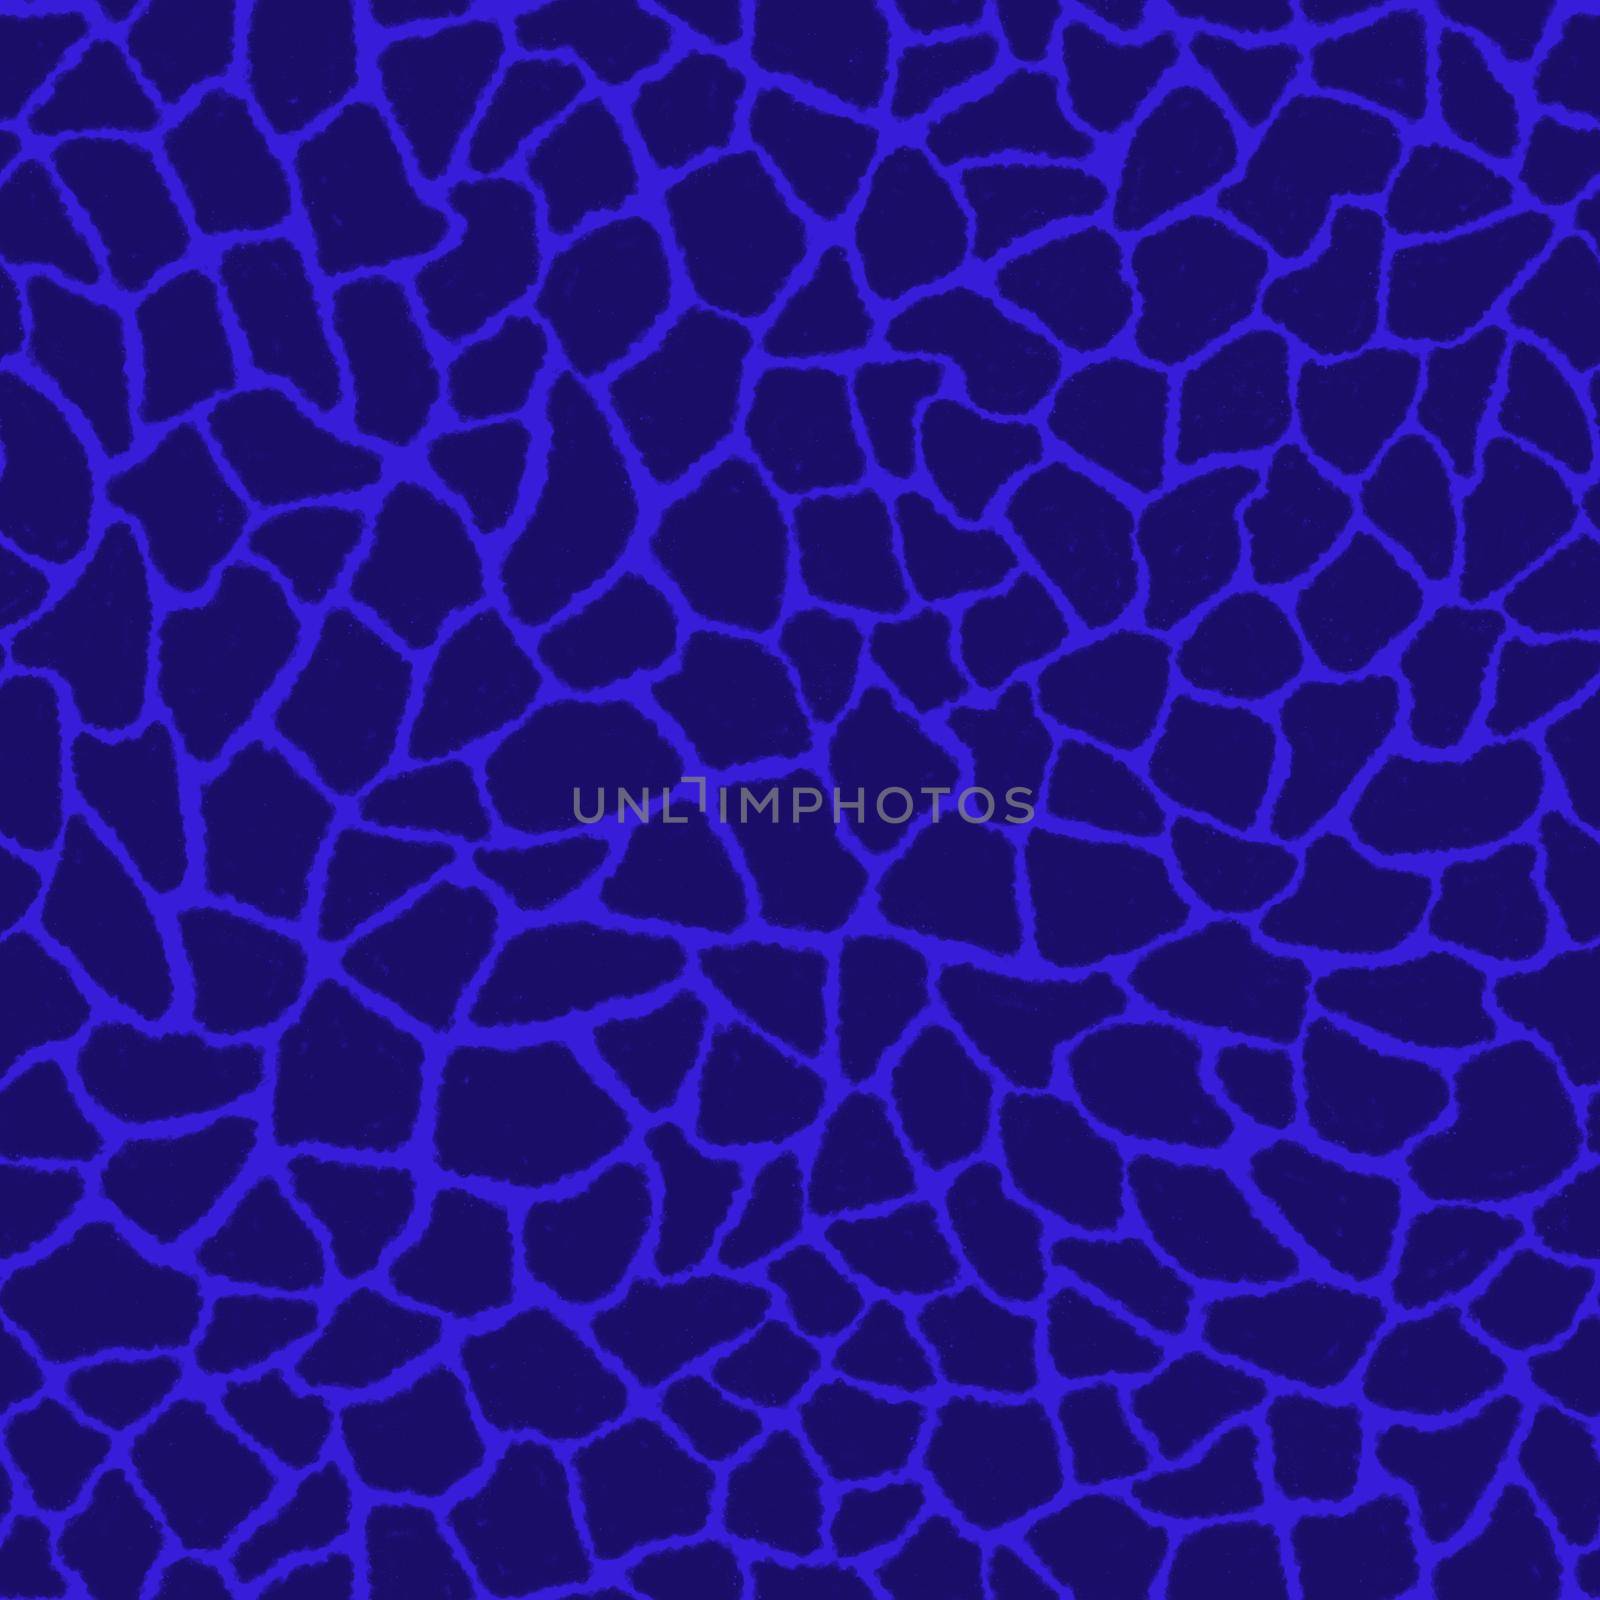 Giraffe skin color seamless pattern with fashion animal print for continuous replicate. Chaotic mosaic violet pieces on azure background. Wrapping paper, funny textile fabric print,design,decor by Angelsmoon